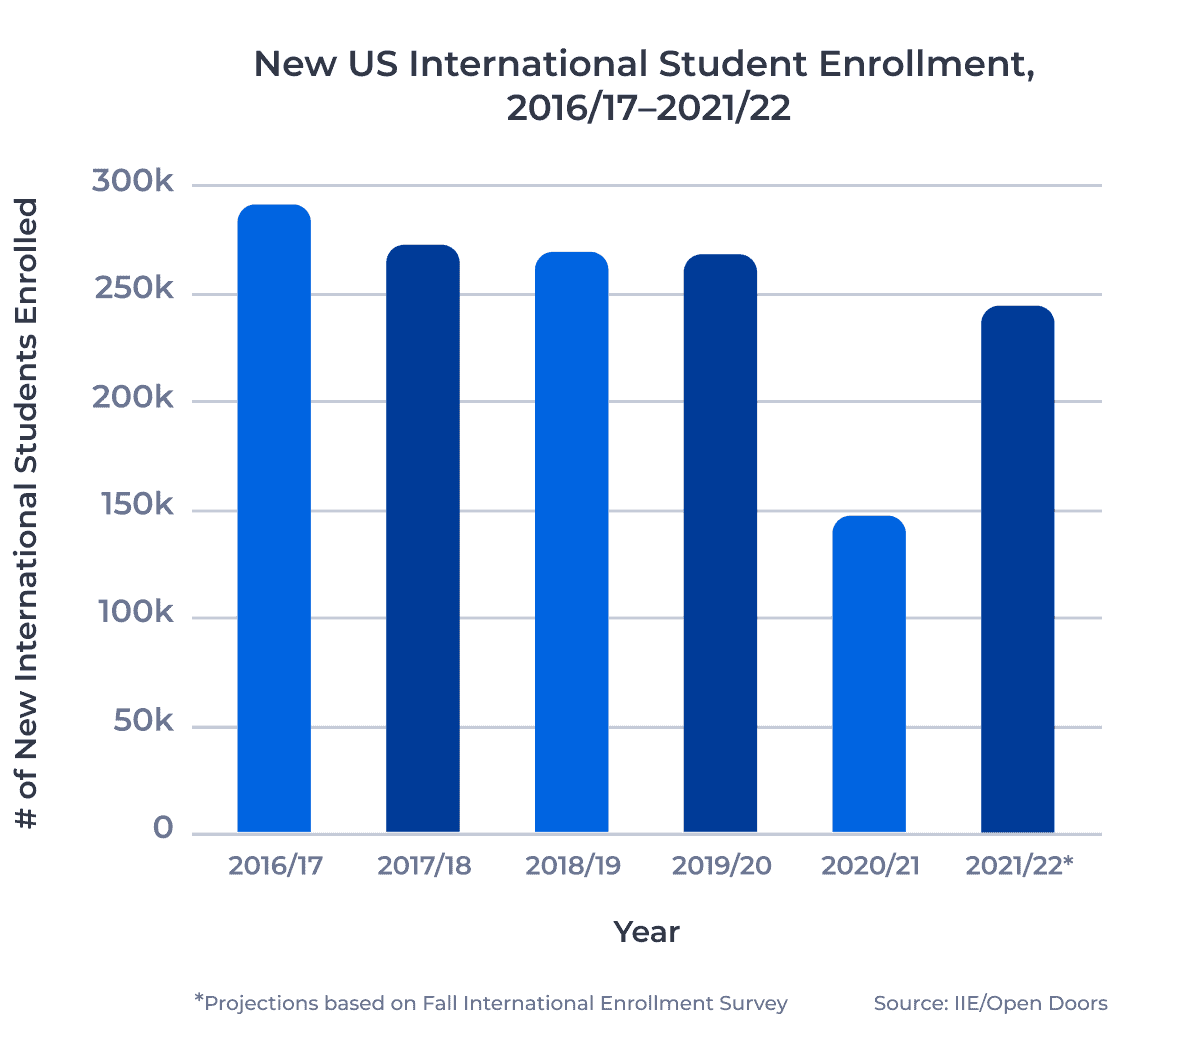 Bar chart showing new international students enrollment in the US each year between 2016/17 and 2021/22.